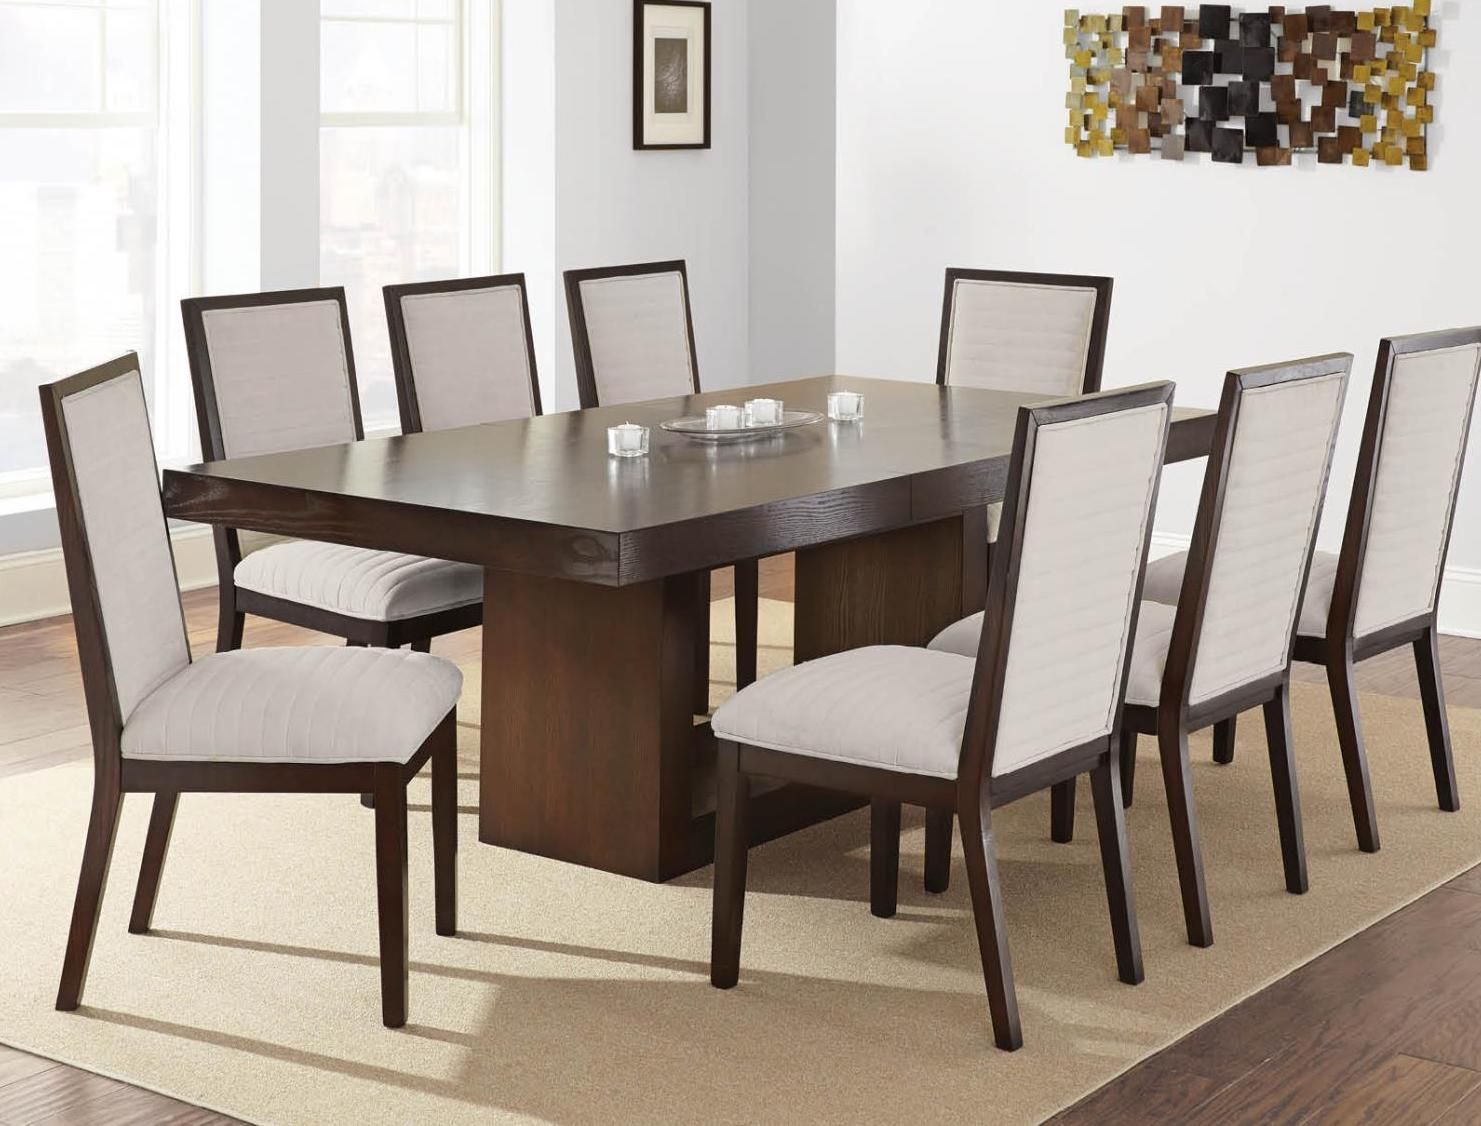 51 Dining Table Set 8 Chairs Chadoni 7 Piece Dining Set Table With For Extendable Dining Tables With 8 Seats (View 26 of 26)